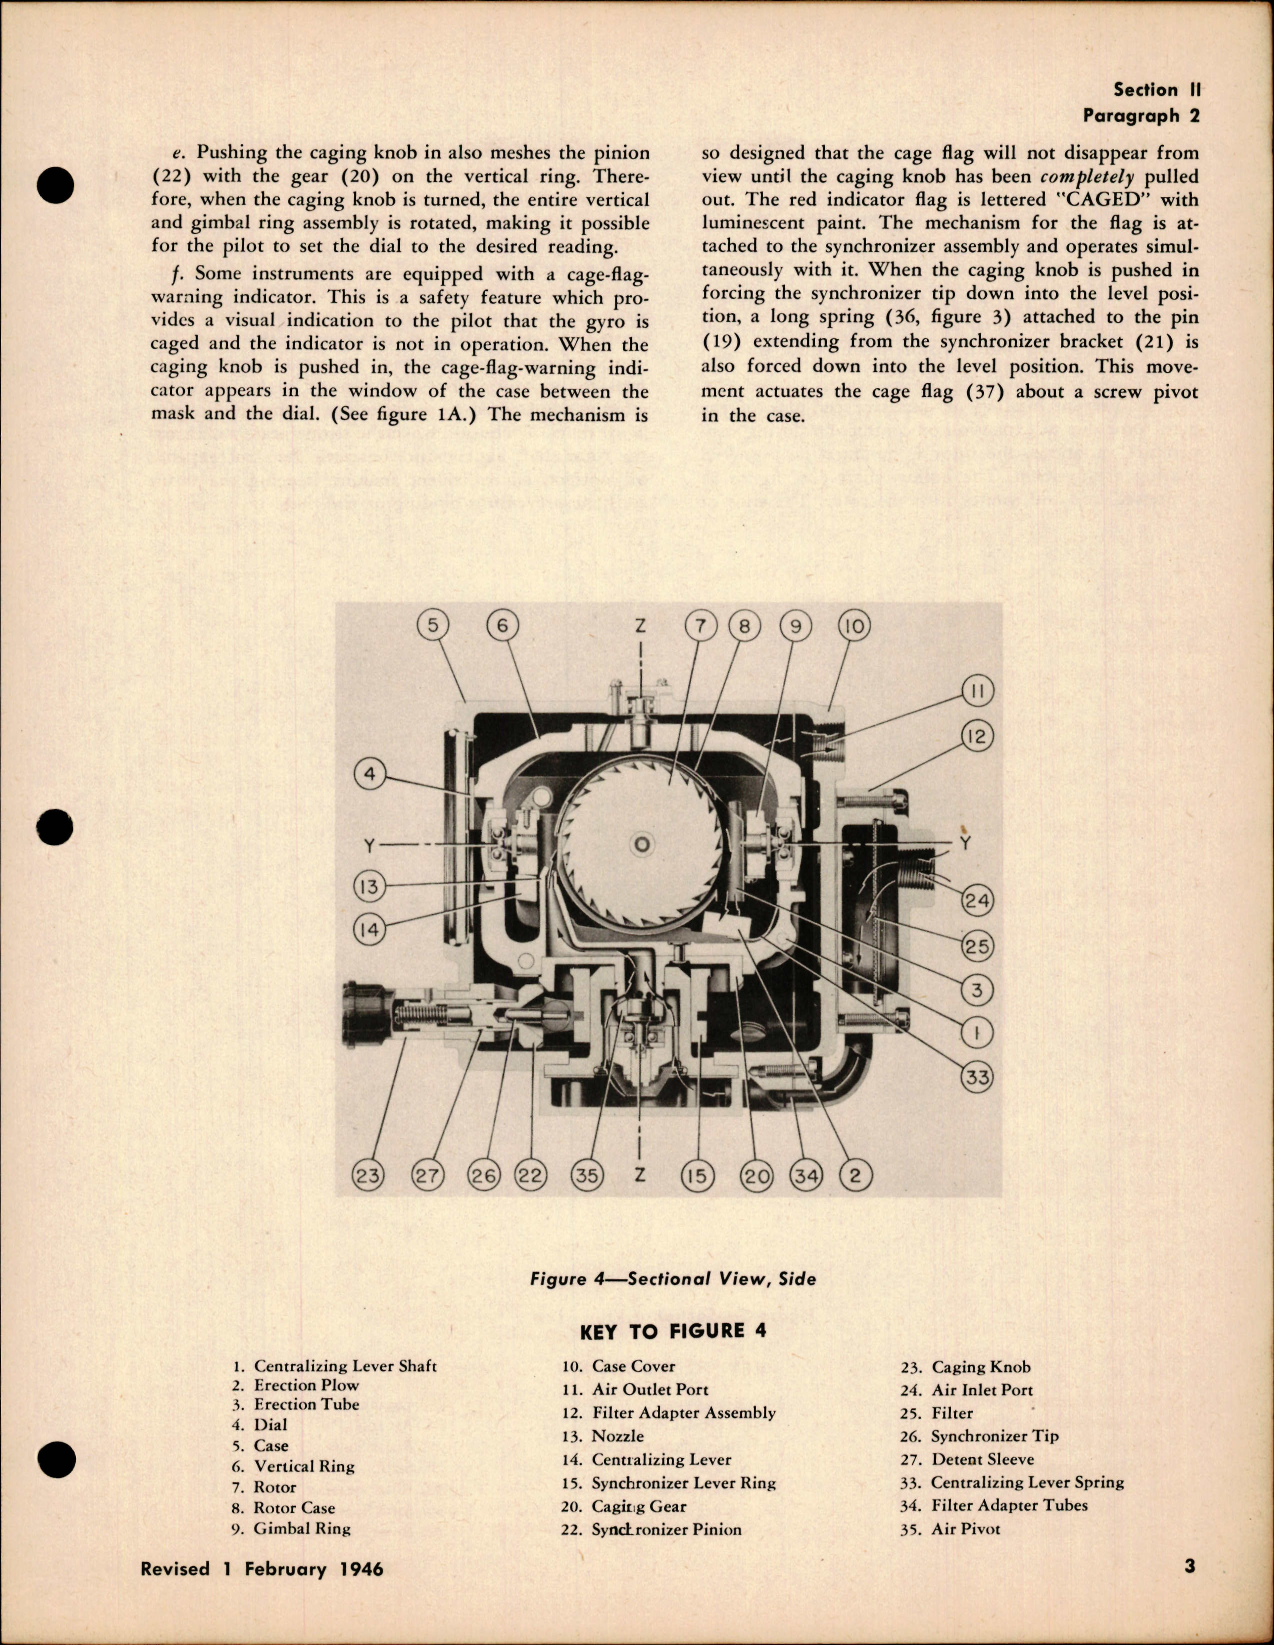 Sample page 7 from AirCorps Library document: Overhaul Instructions for Gyro Horizon and Directional Gyro Indicators